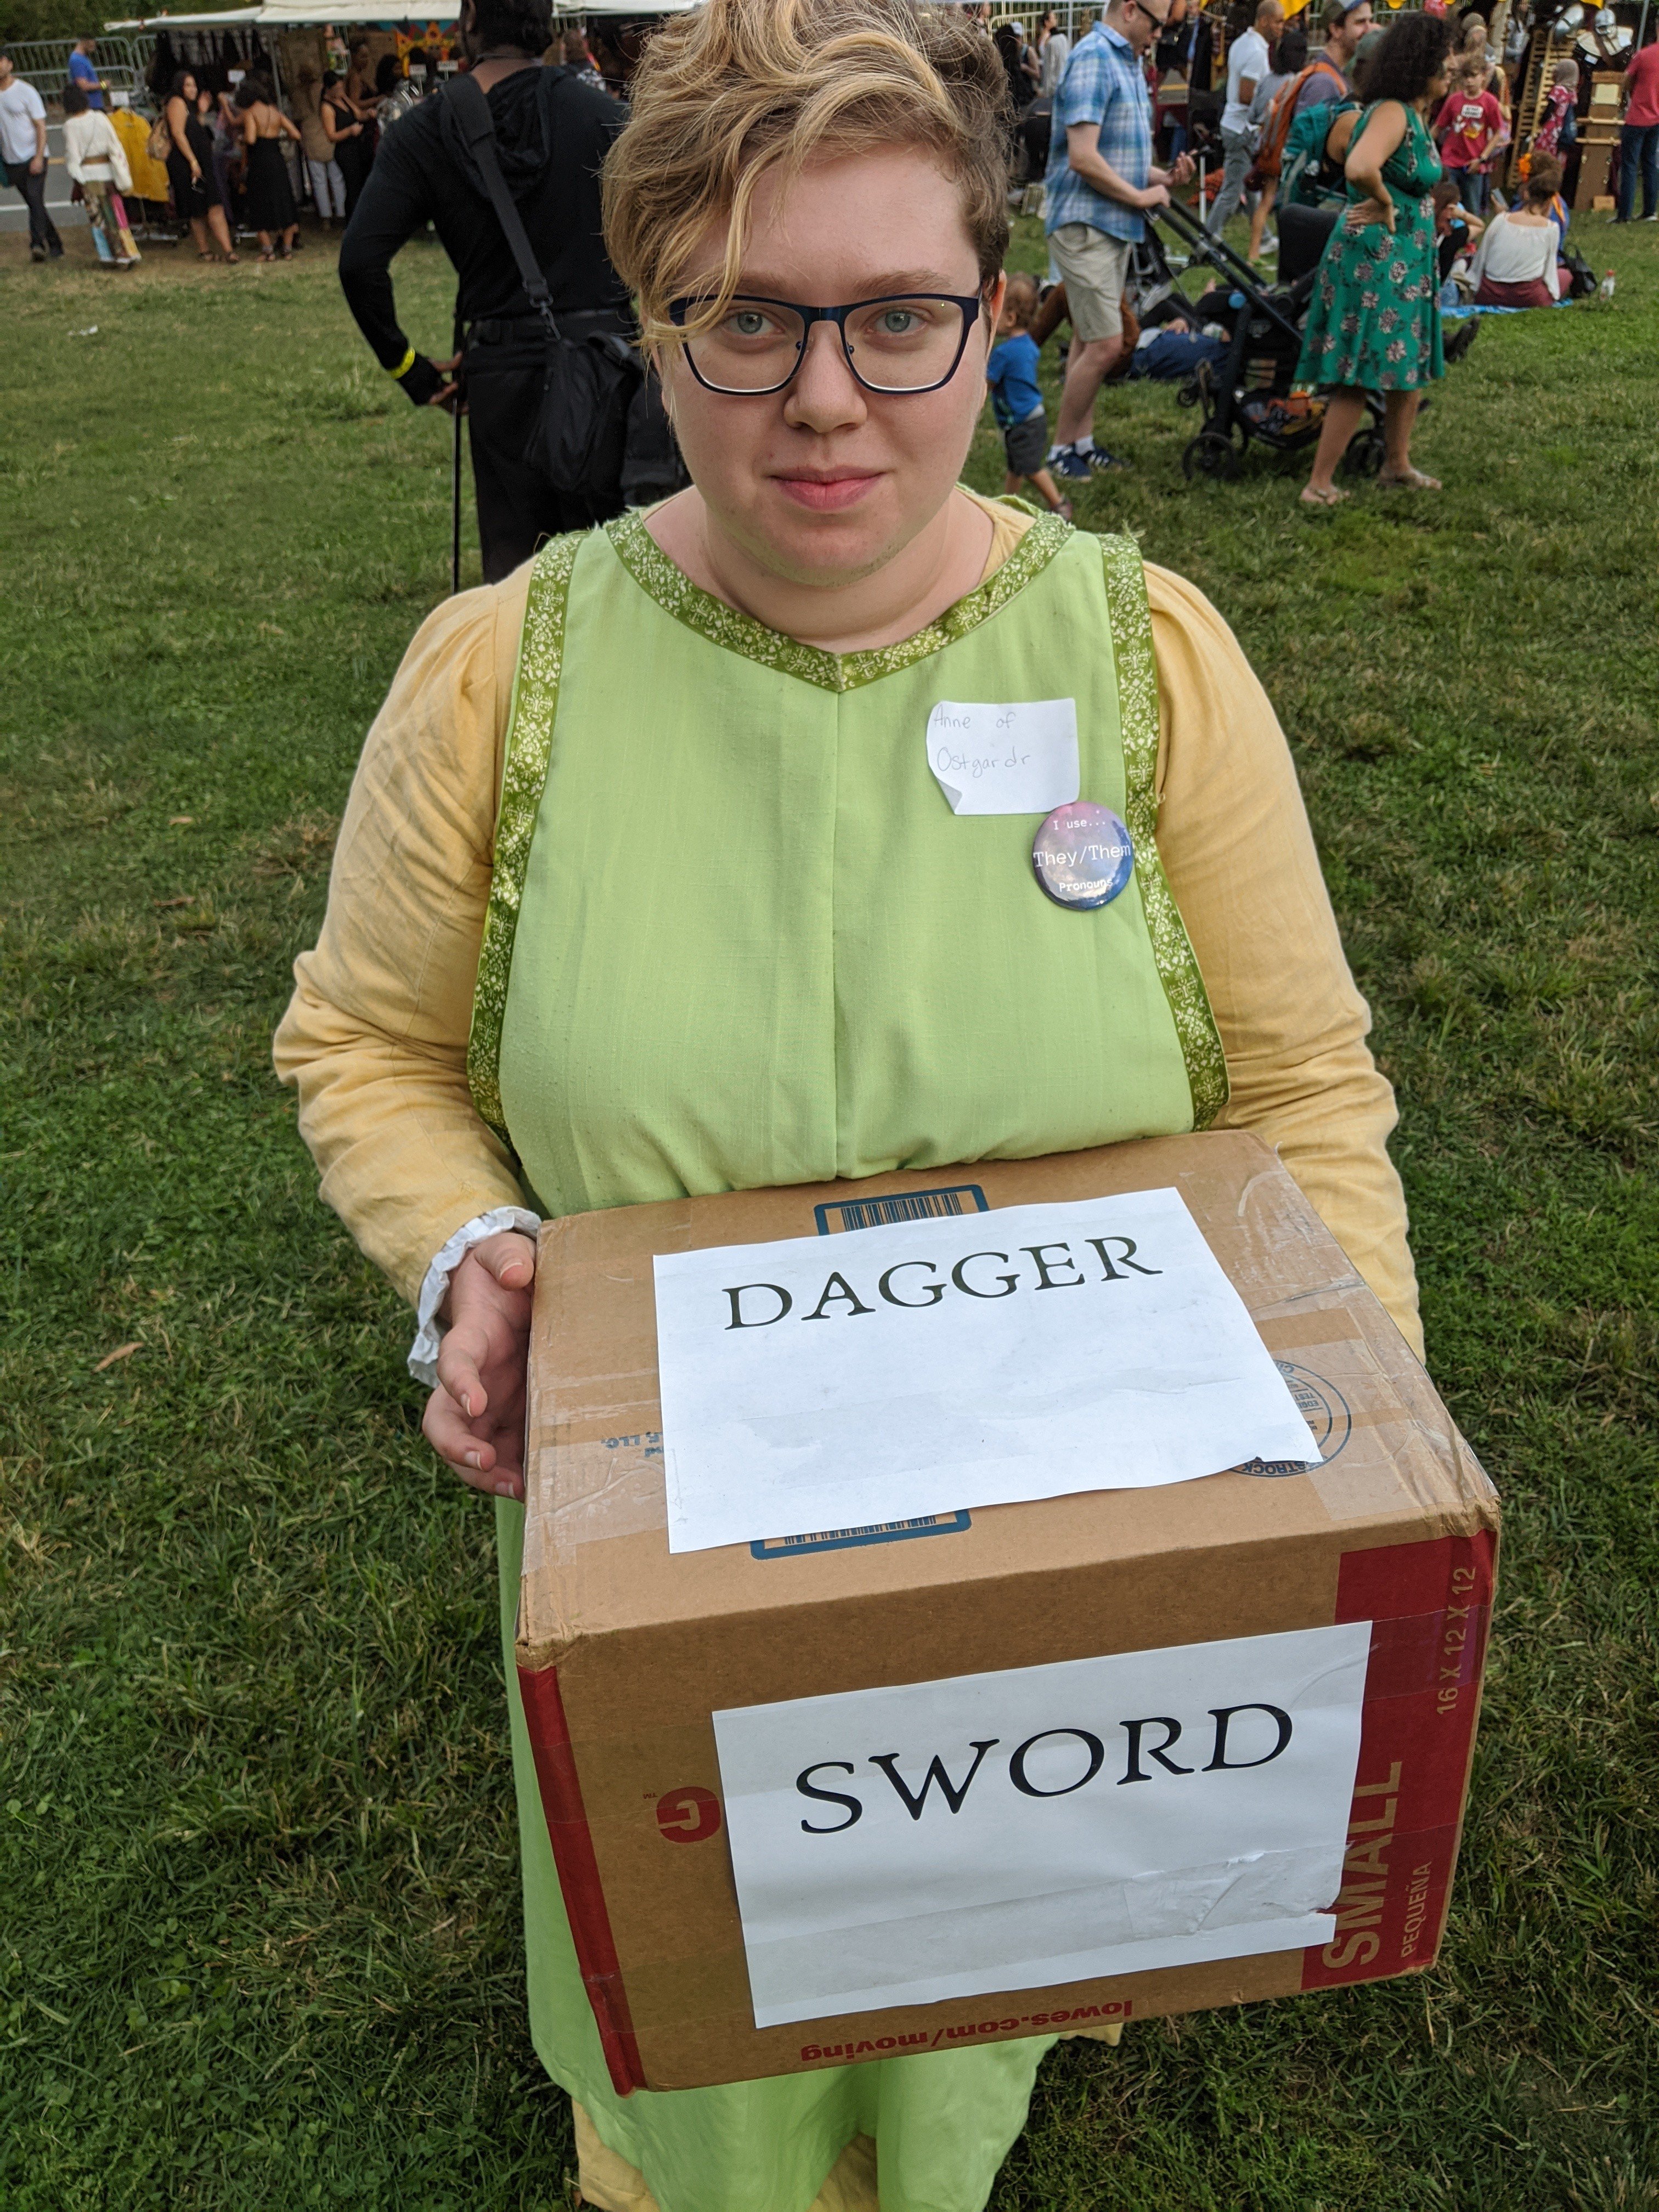 Me holding the 'loaded die', with sides "DAGGER" and "SWORD" visible.